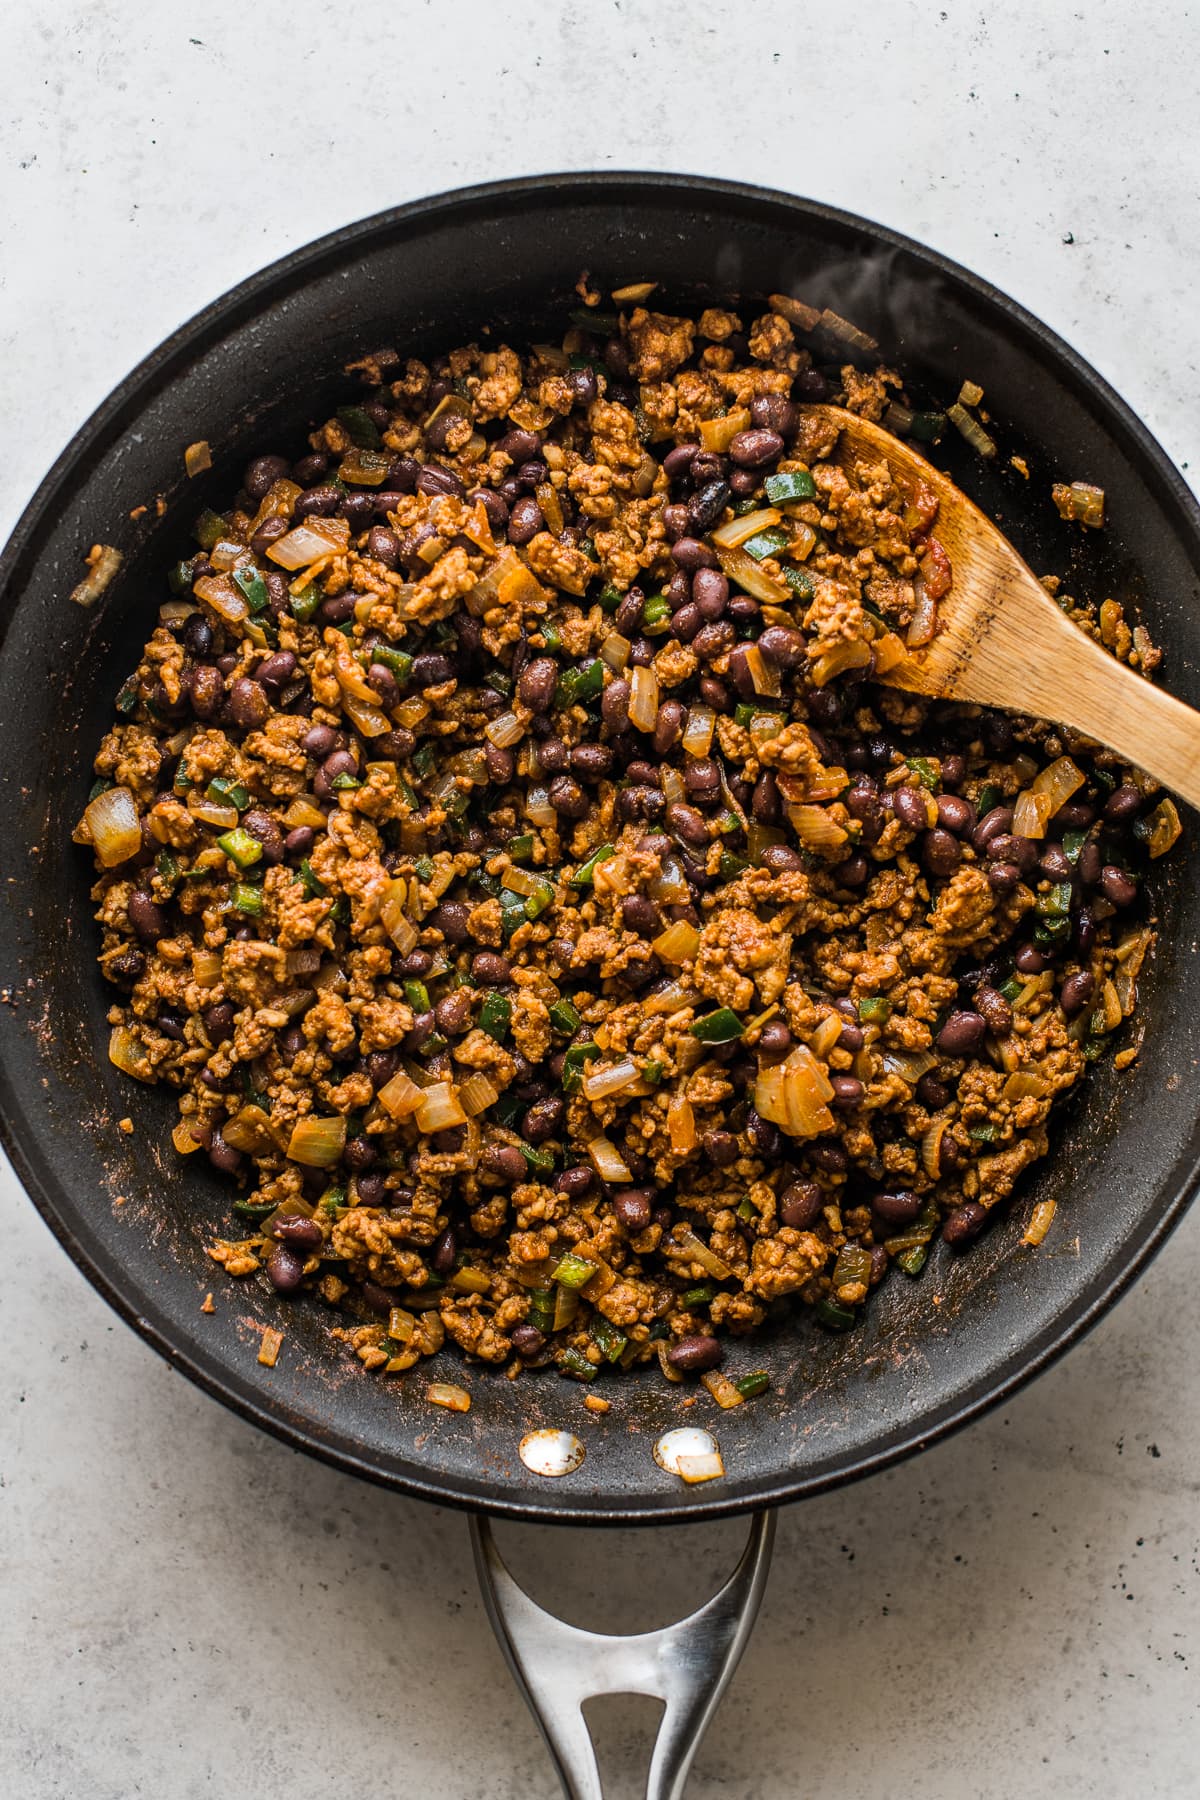 Cooked filling made from ground chicken, black beans, peppers in a skillet.